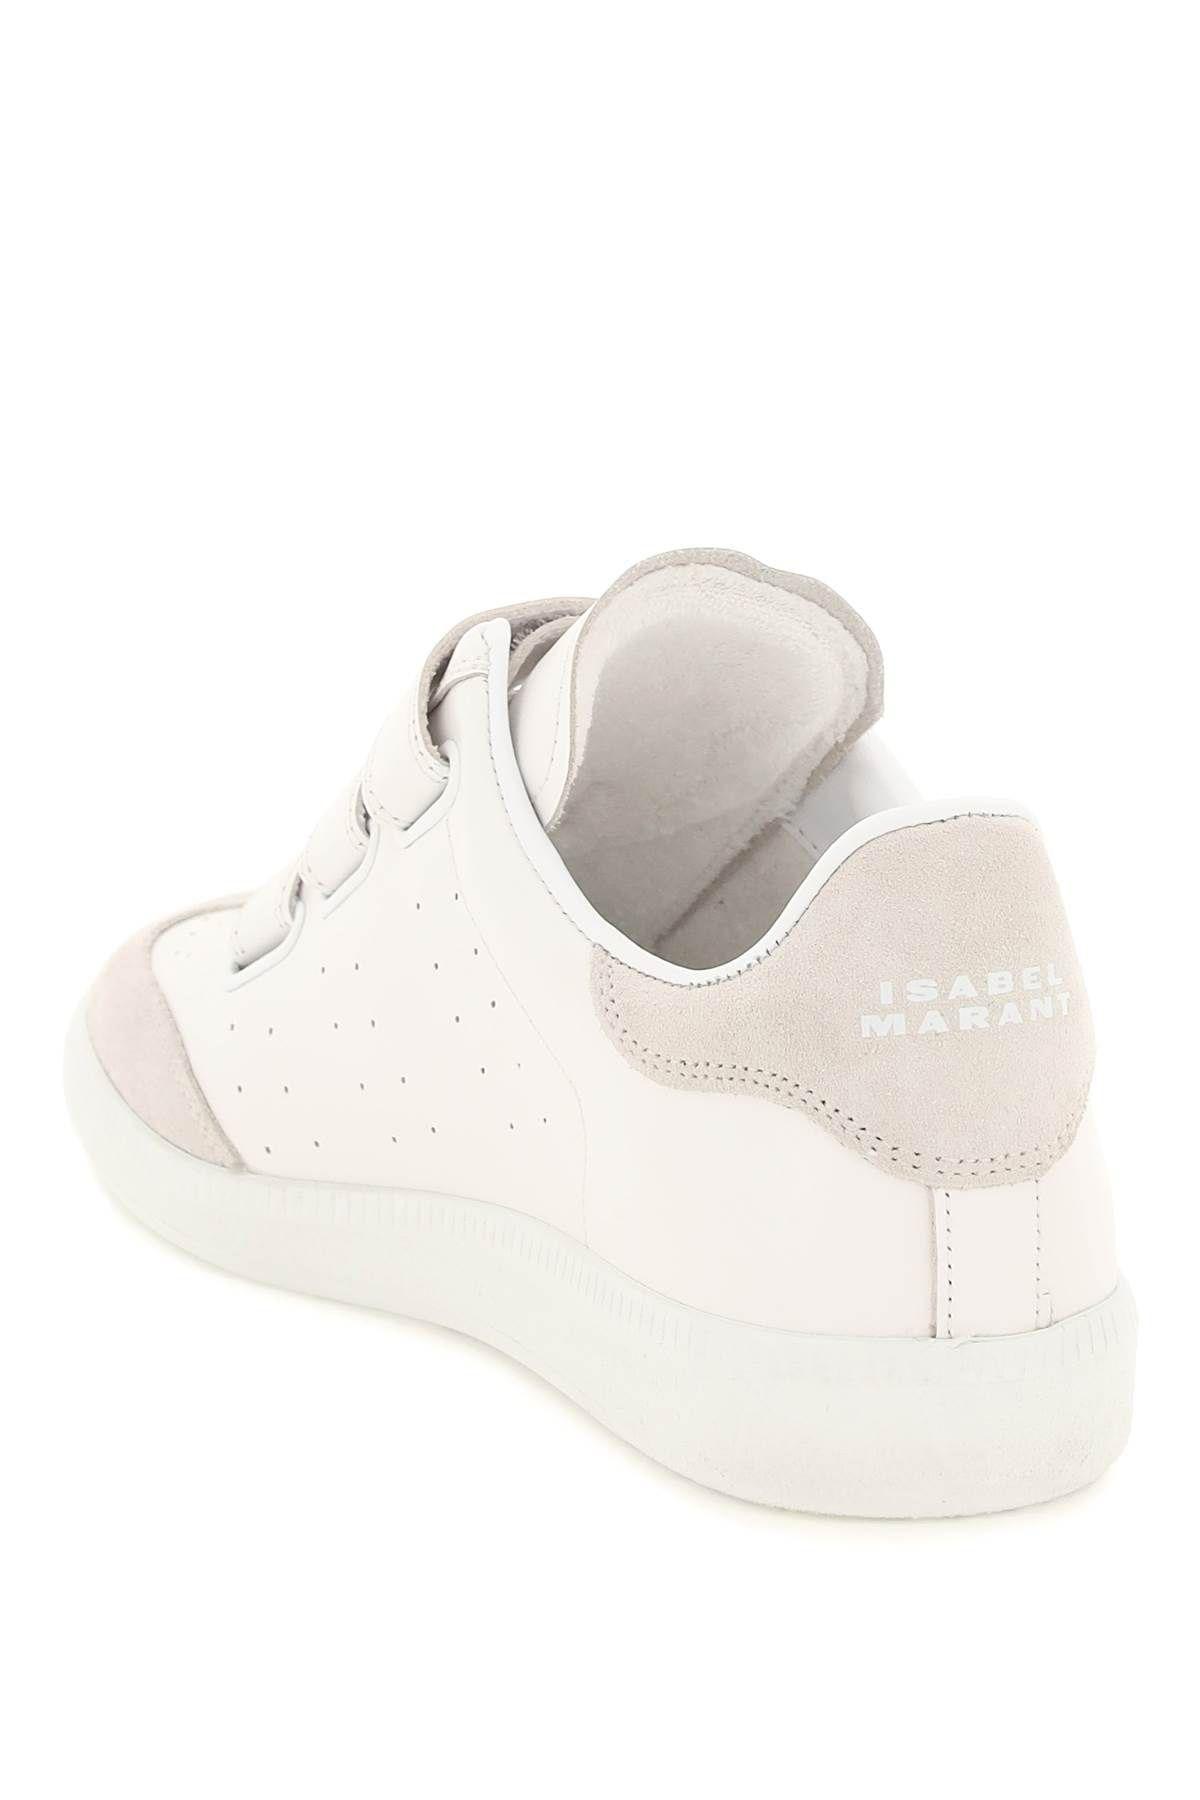 ISABEL MARANT BETH LEATHER SNEAKERS